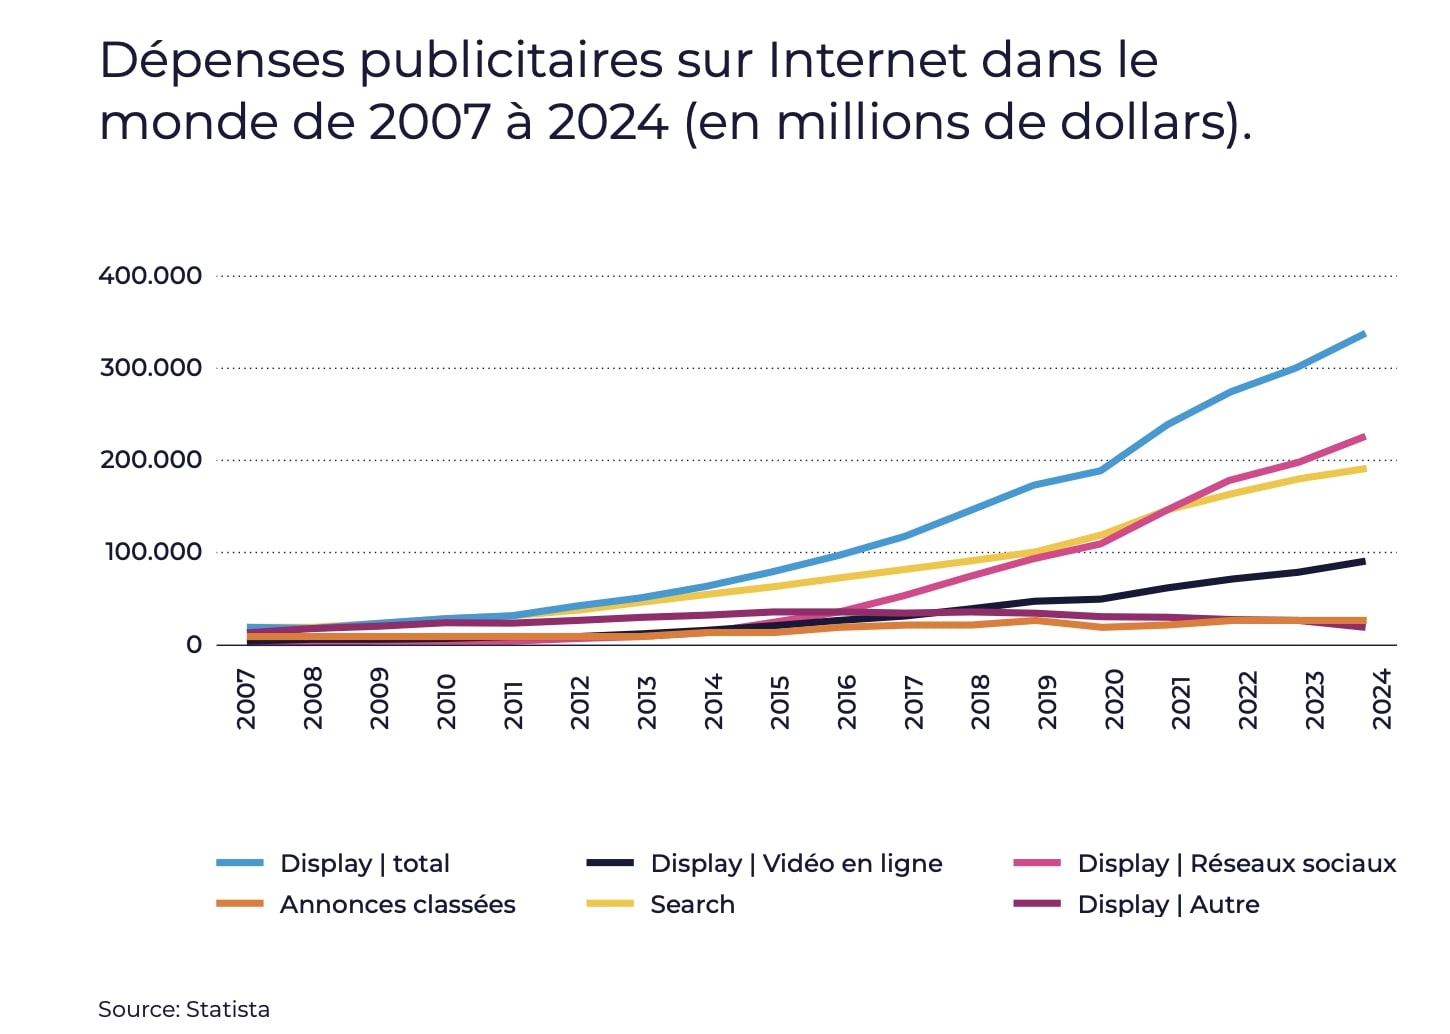 Worldwide Internet advertising spend from 2007 to 2024 (in millions of dollars): increase